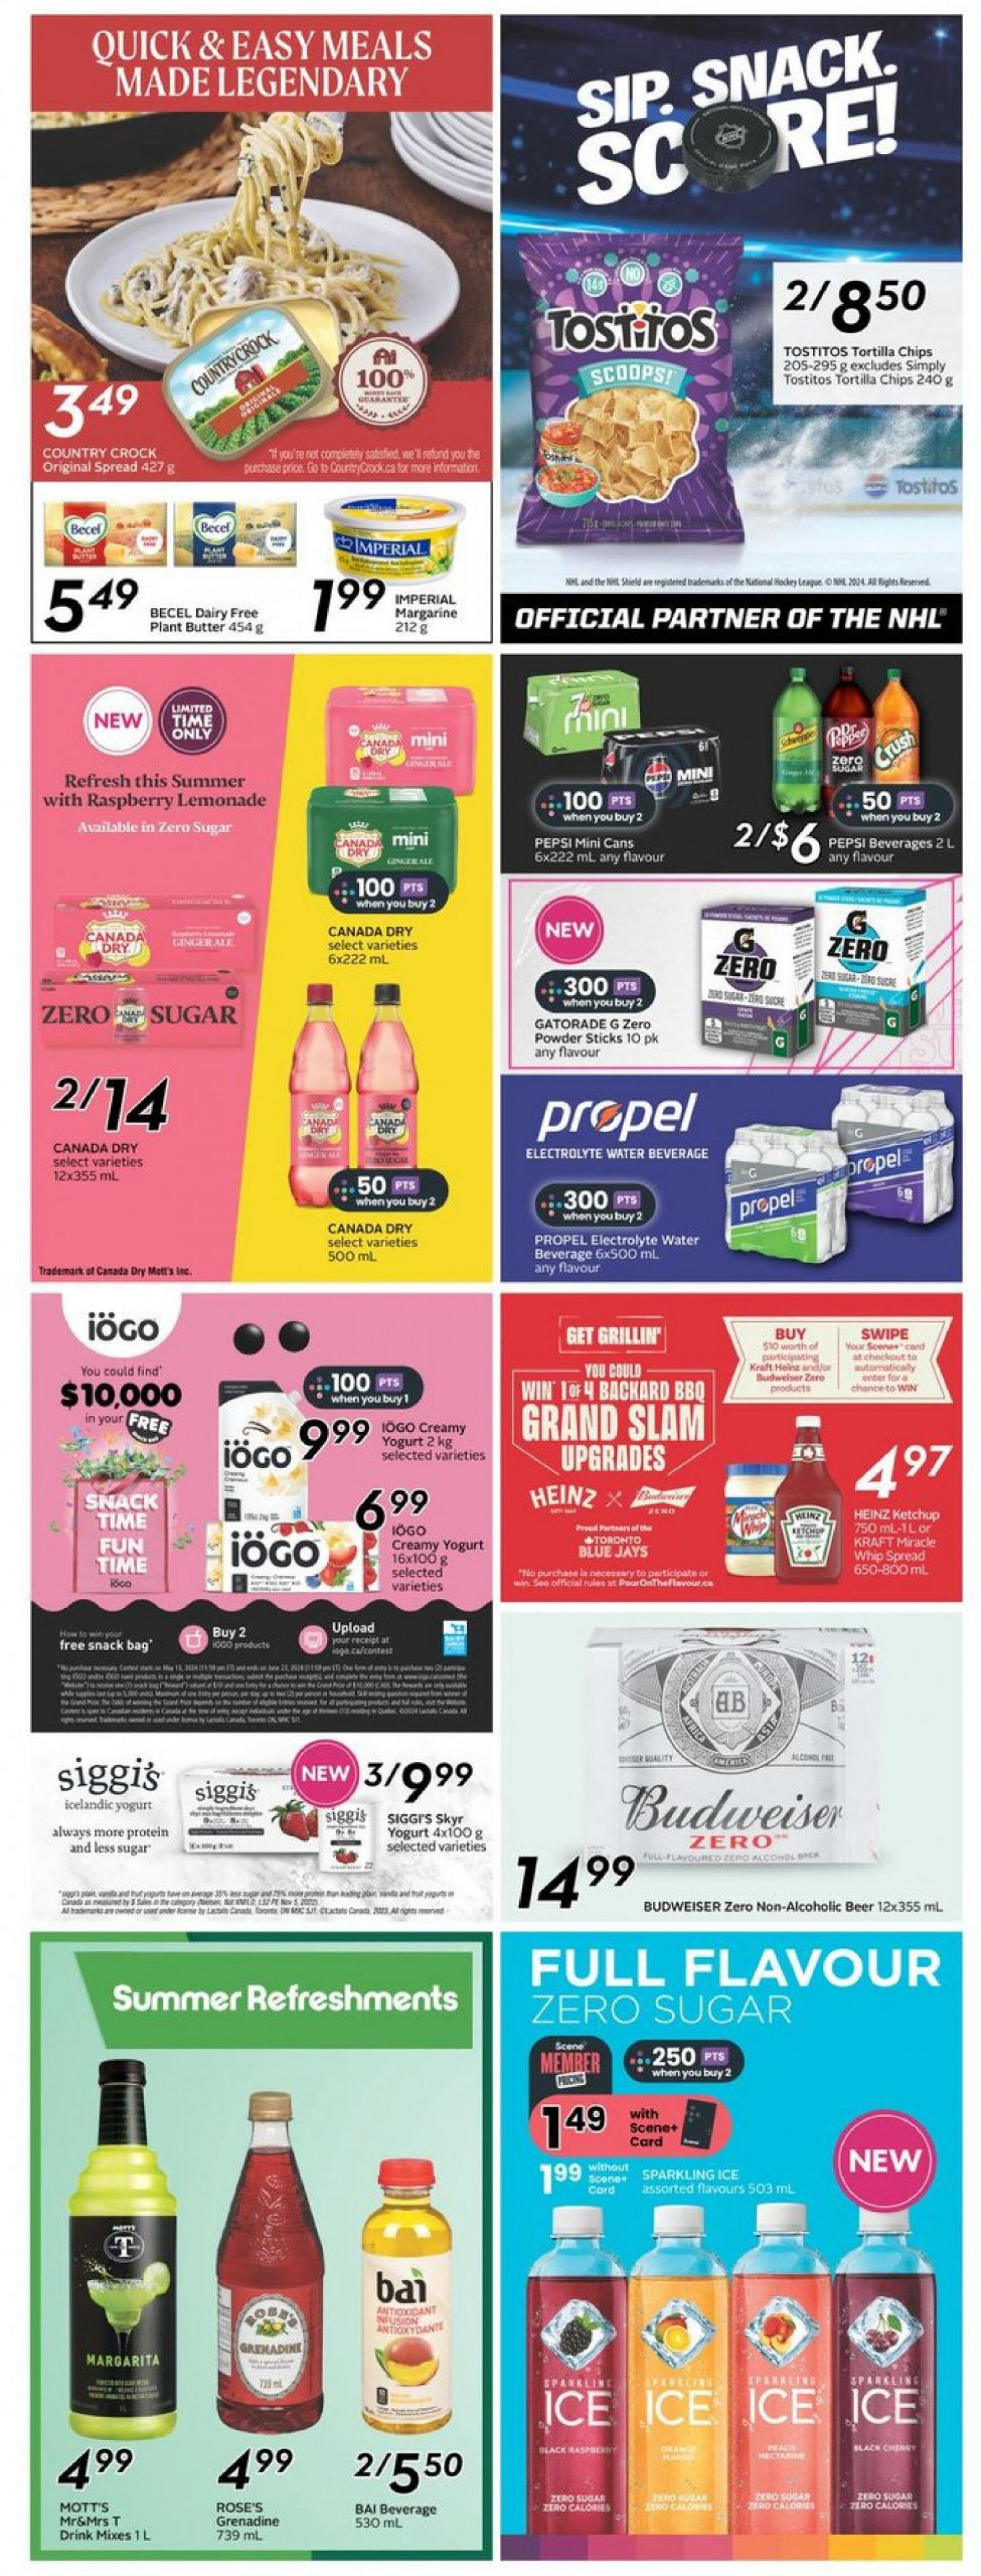 sobeys - Sobeys - Weekly Flyer - Ontario flyer current 16.05. - 22.05. - page: 21